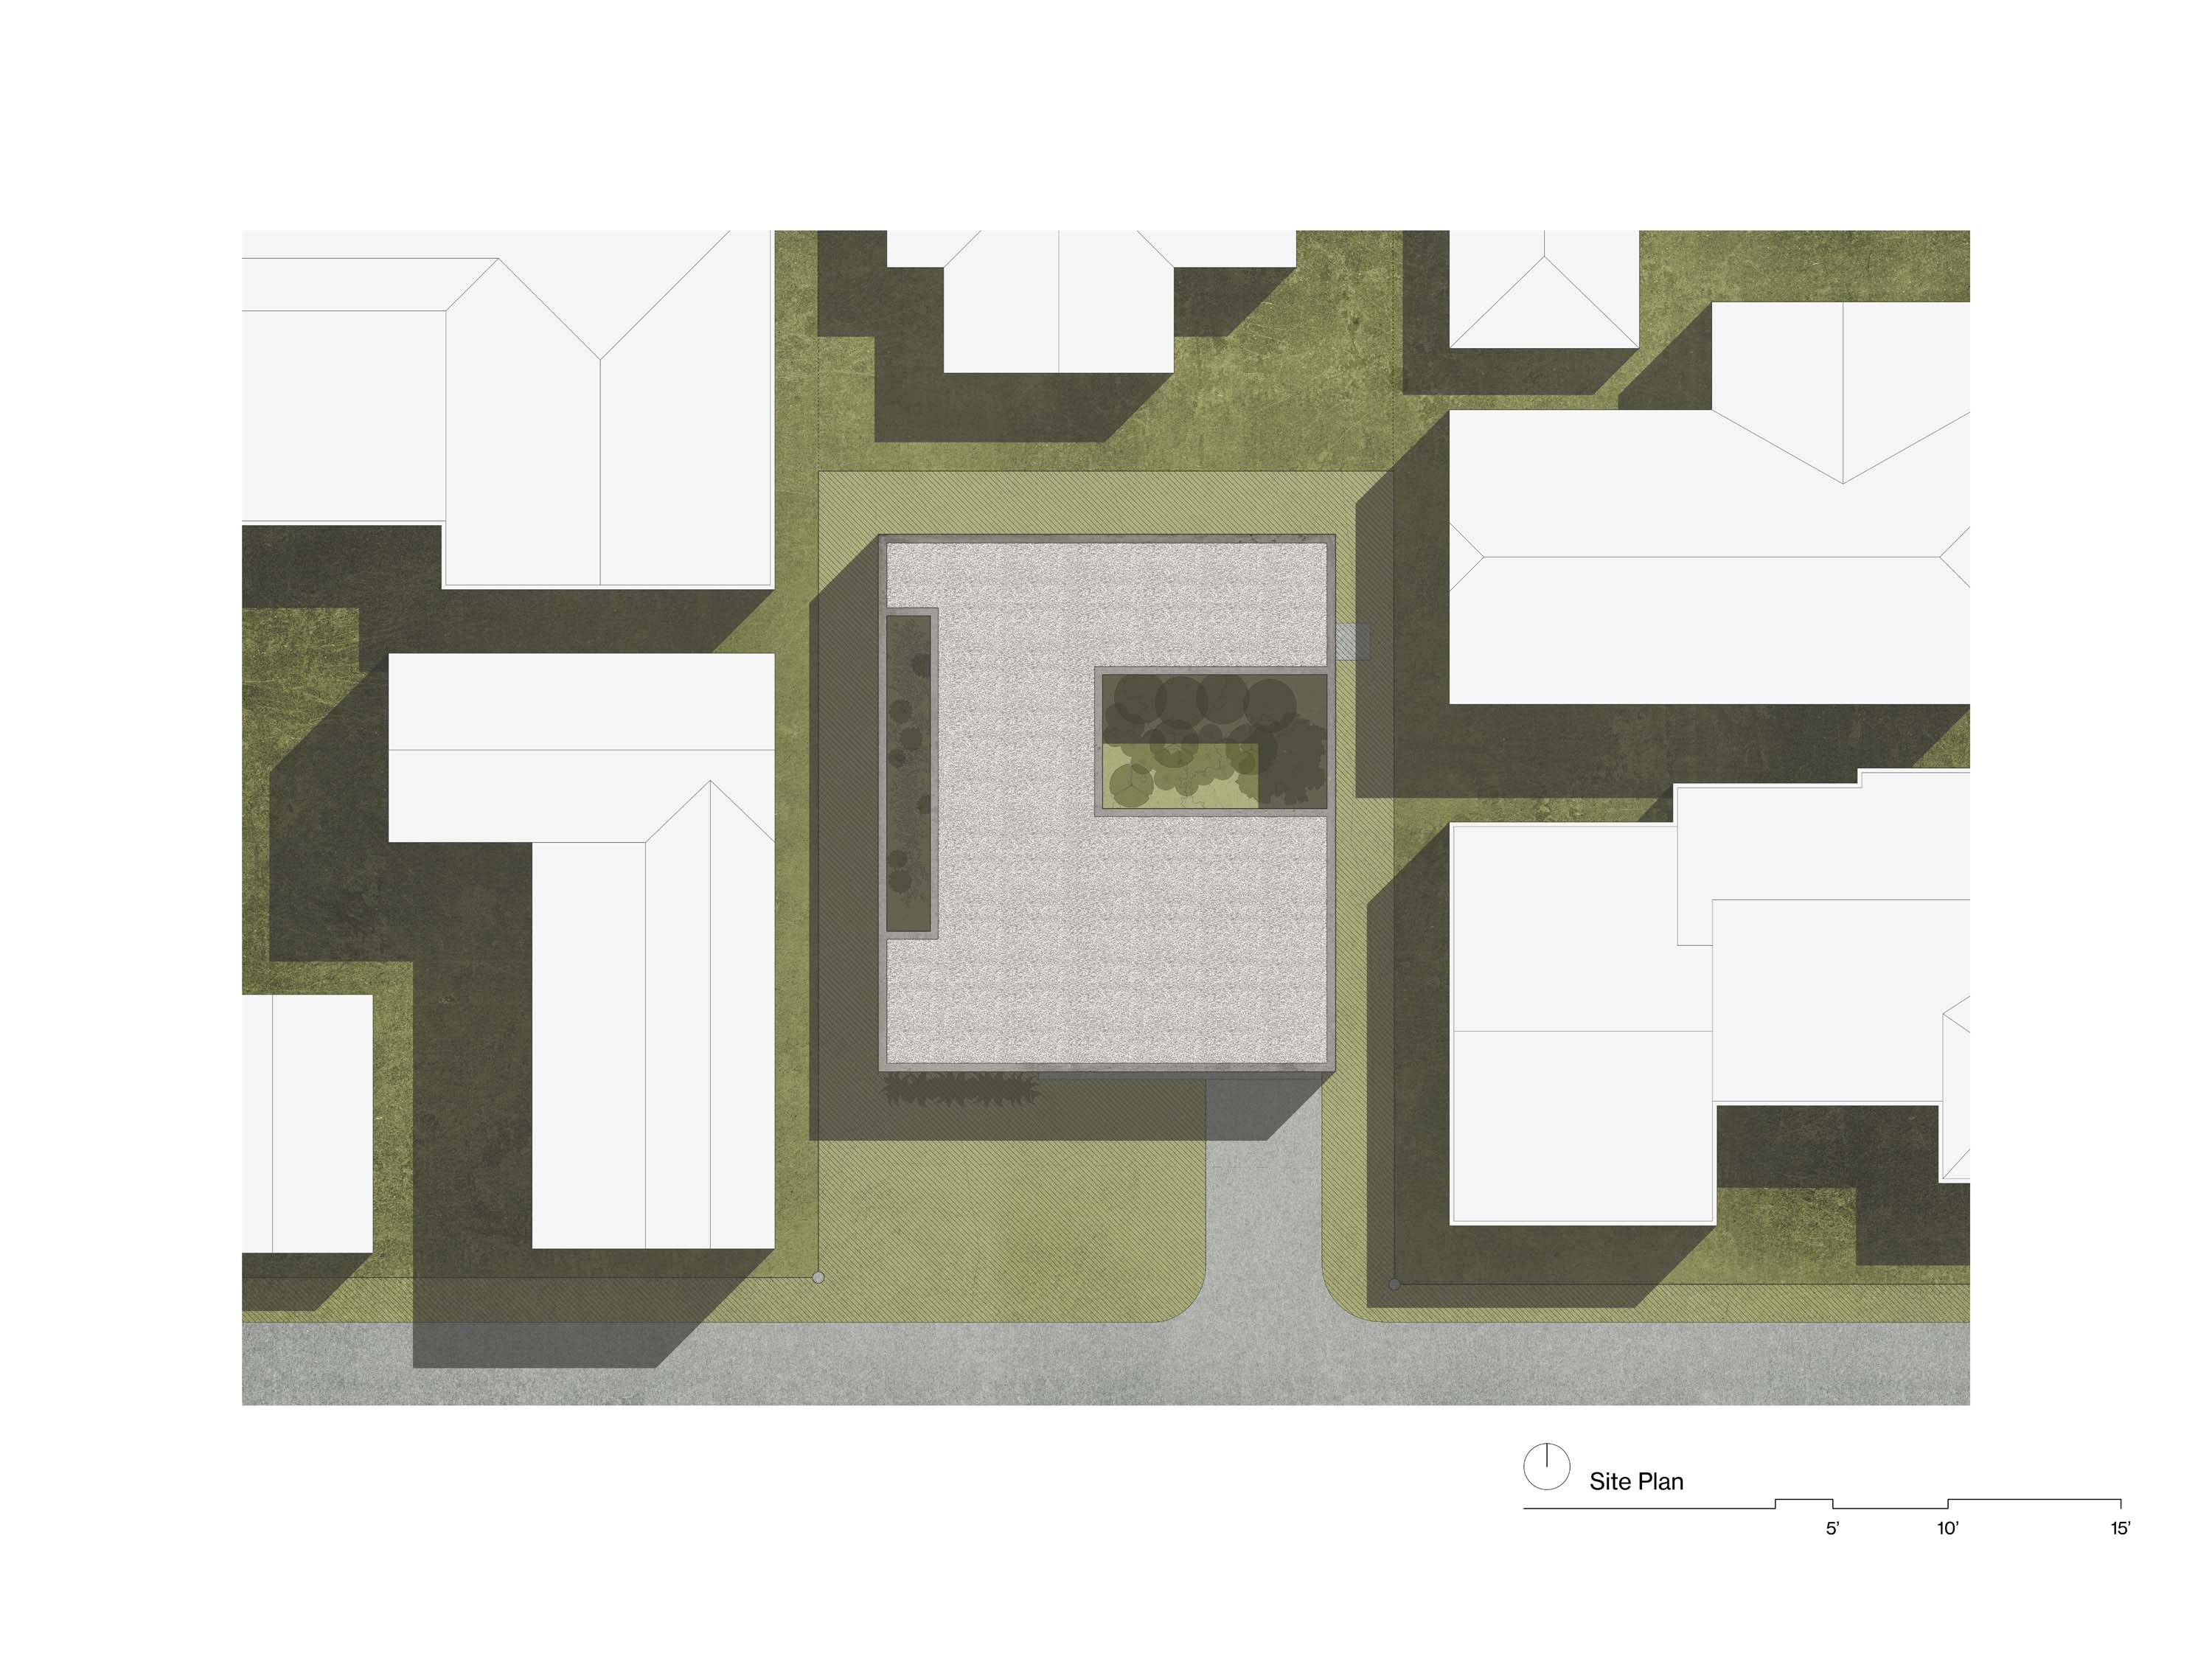 Site plan of New American House by Specht Novak Architects.